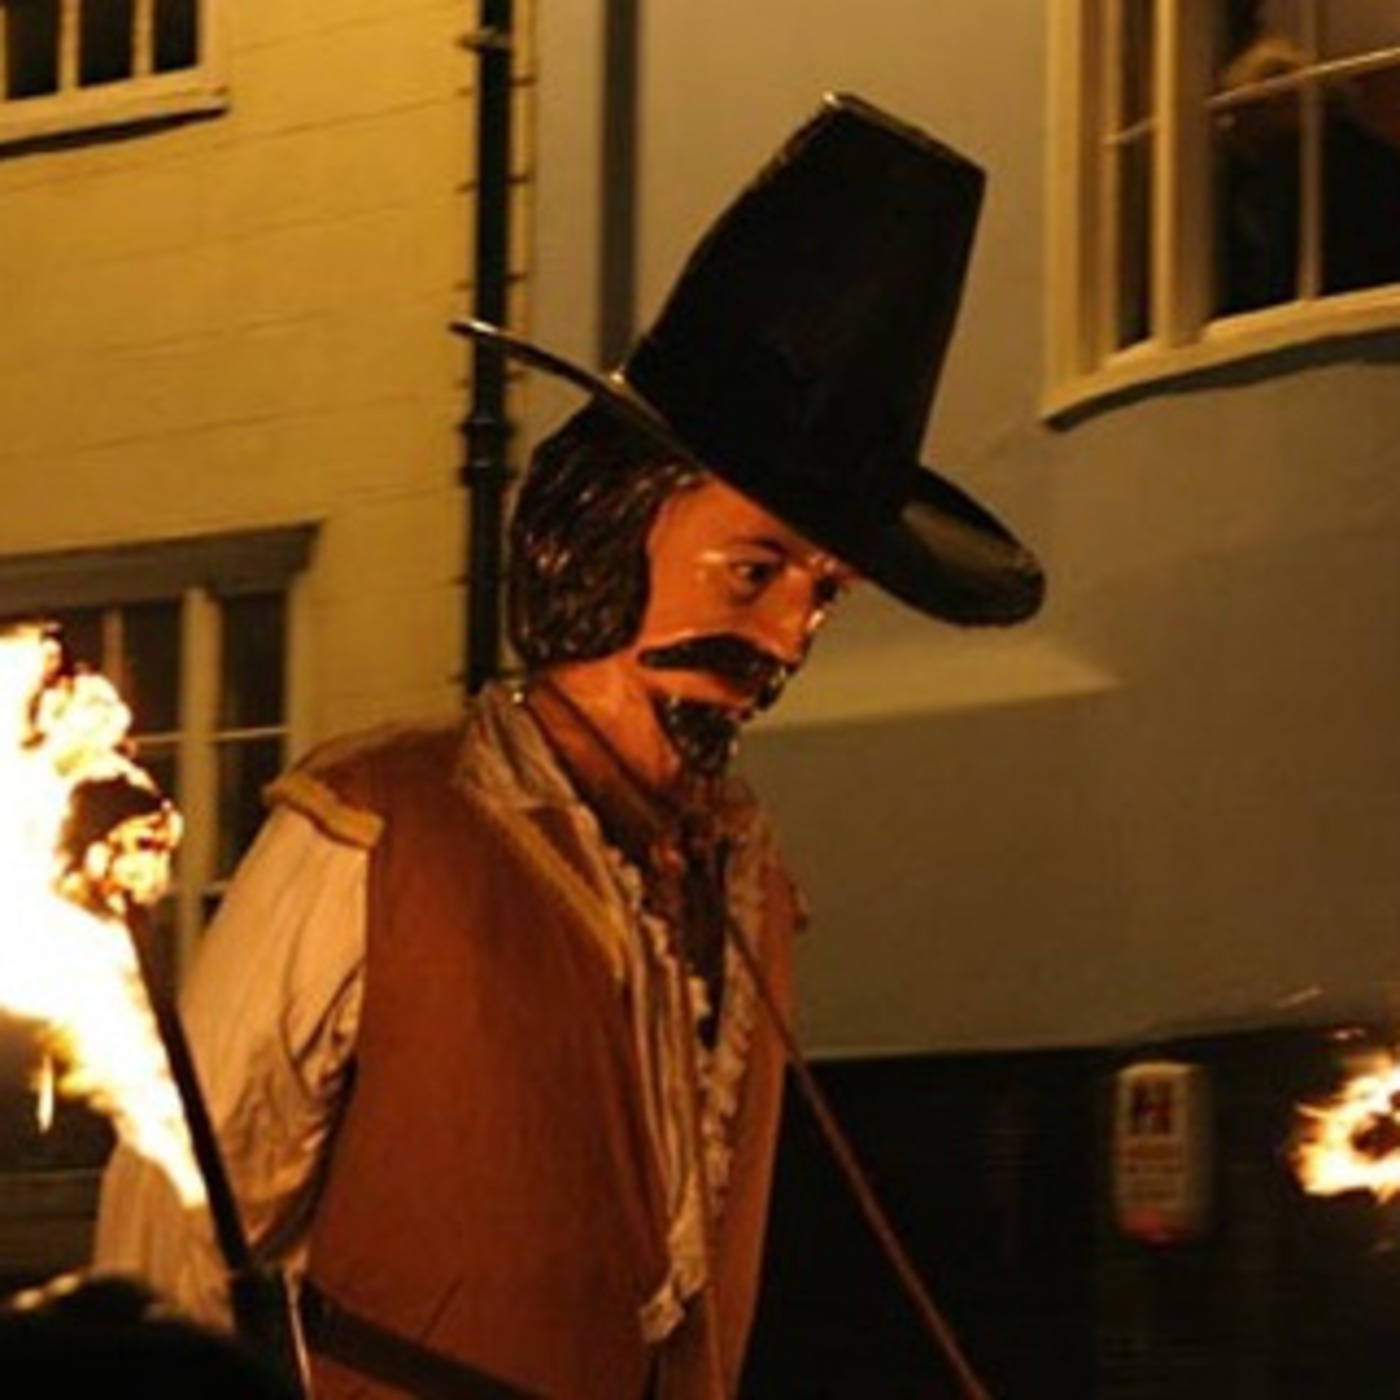 Guy Fawkes Day